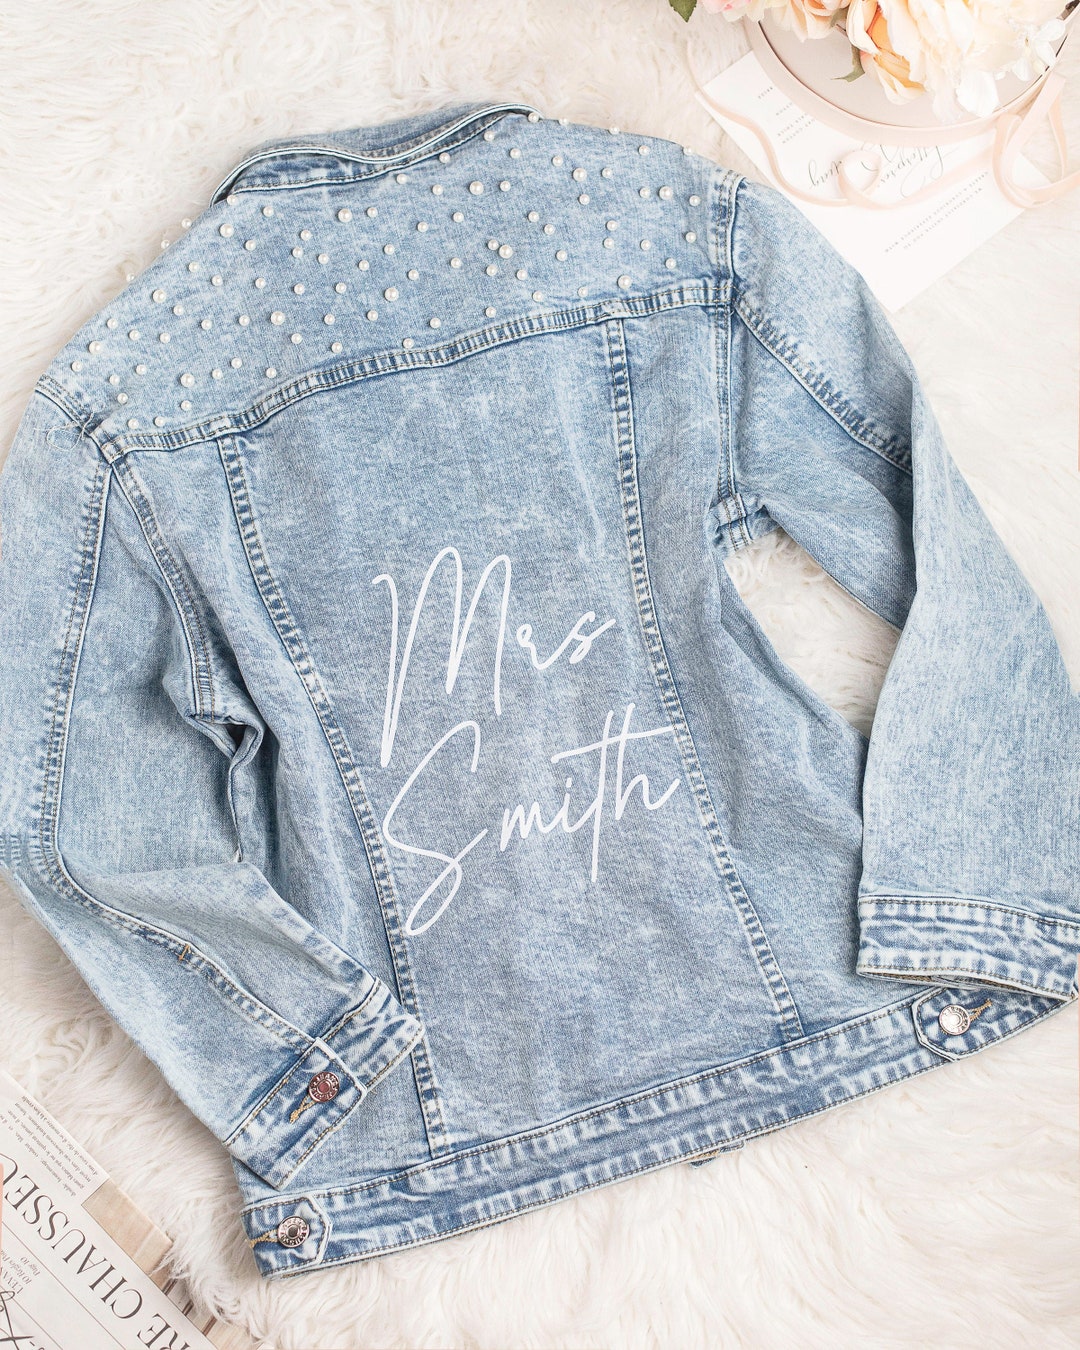 Bridal Shower Gift,bride Denim Jacket With Pearls, Customized ...